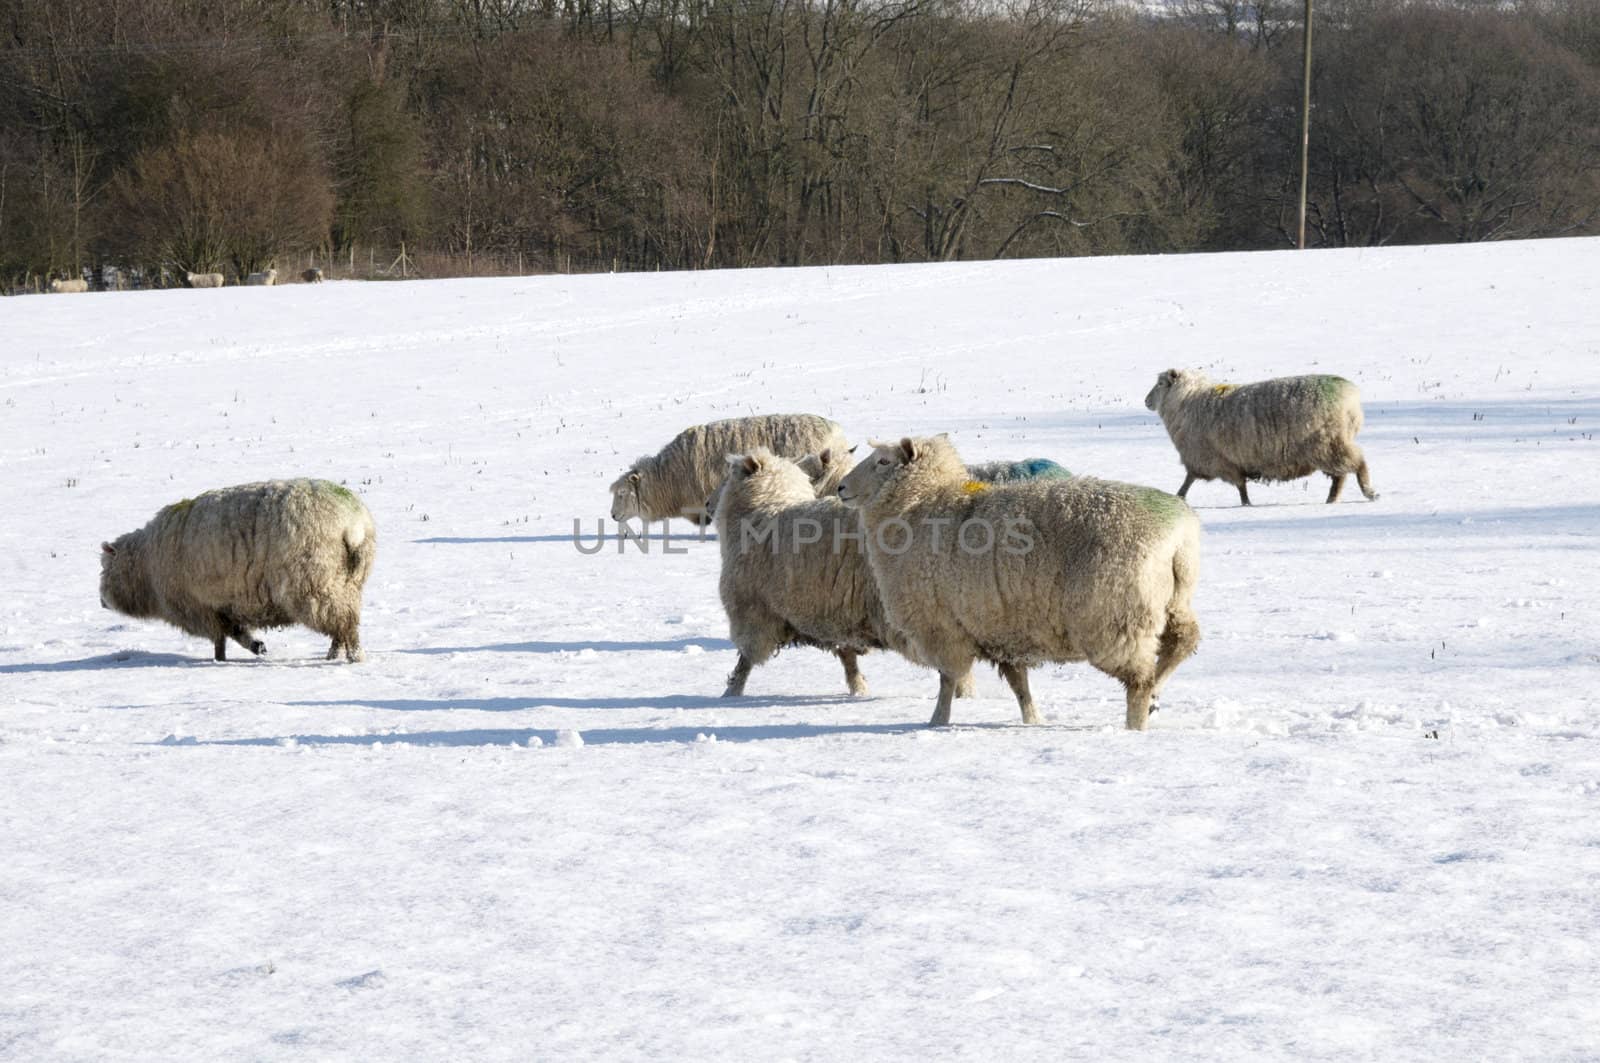 A flock of sheep in field of snow in winter